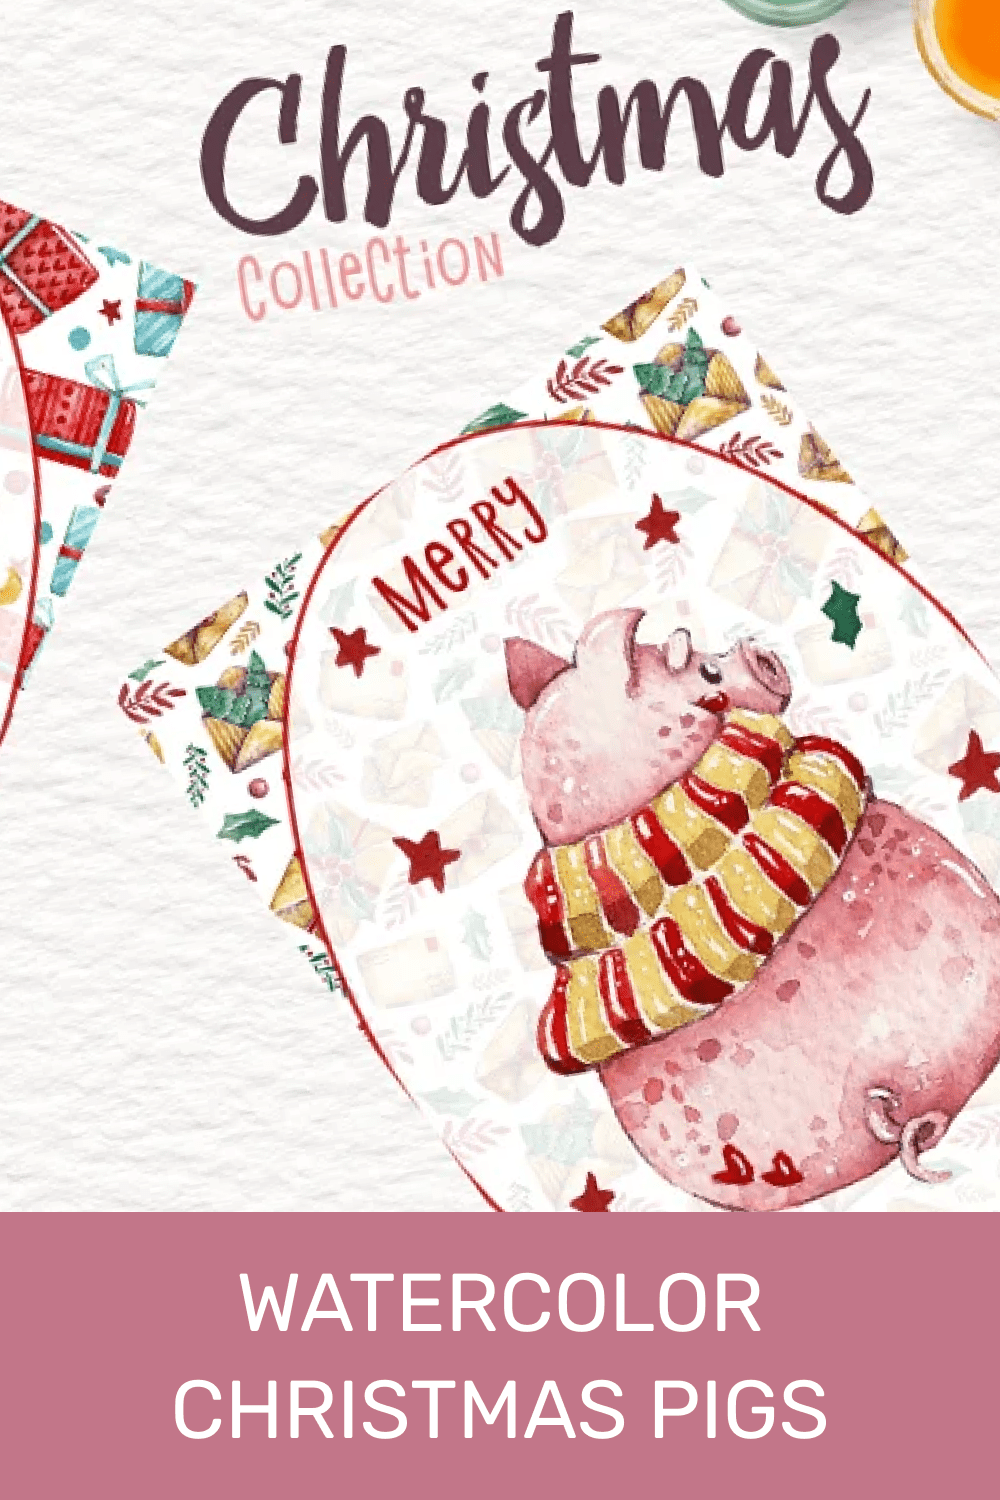 06 watercolor christmas pigs 1000x1500 1